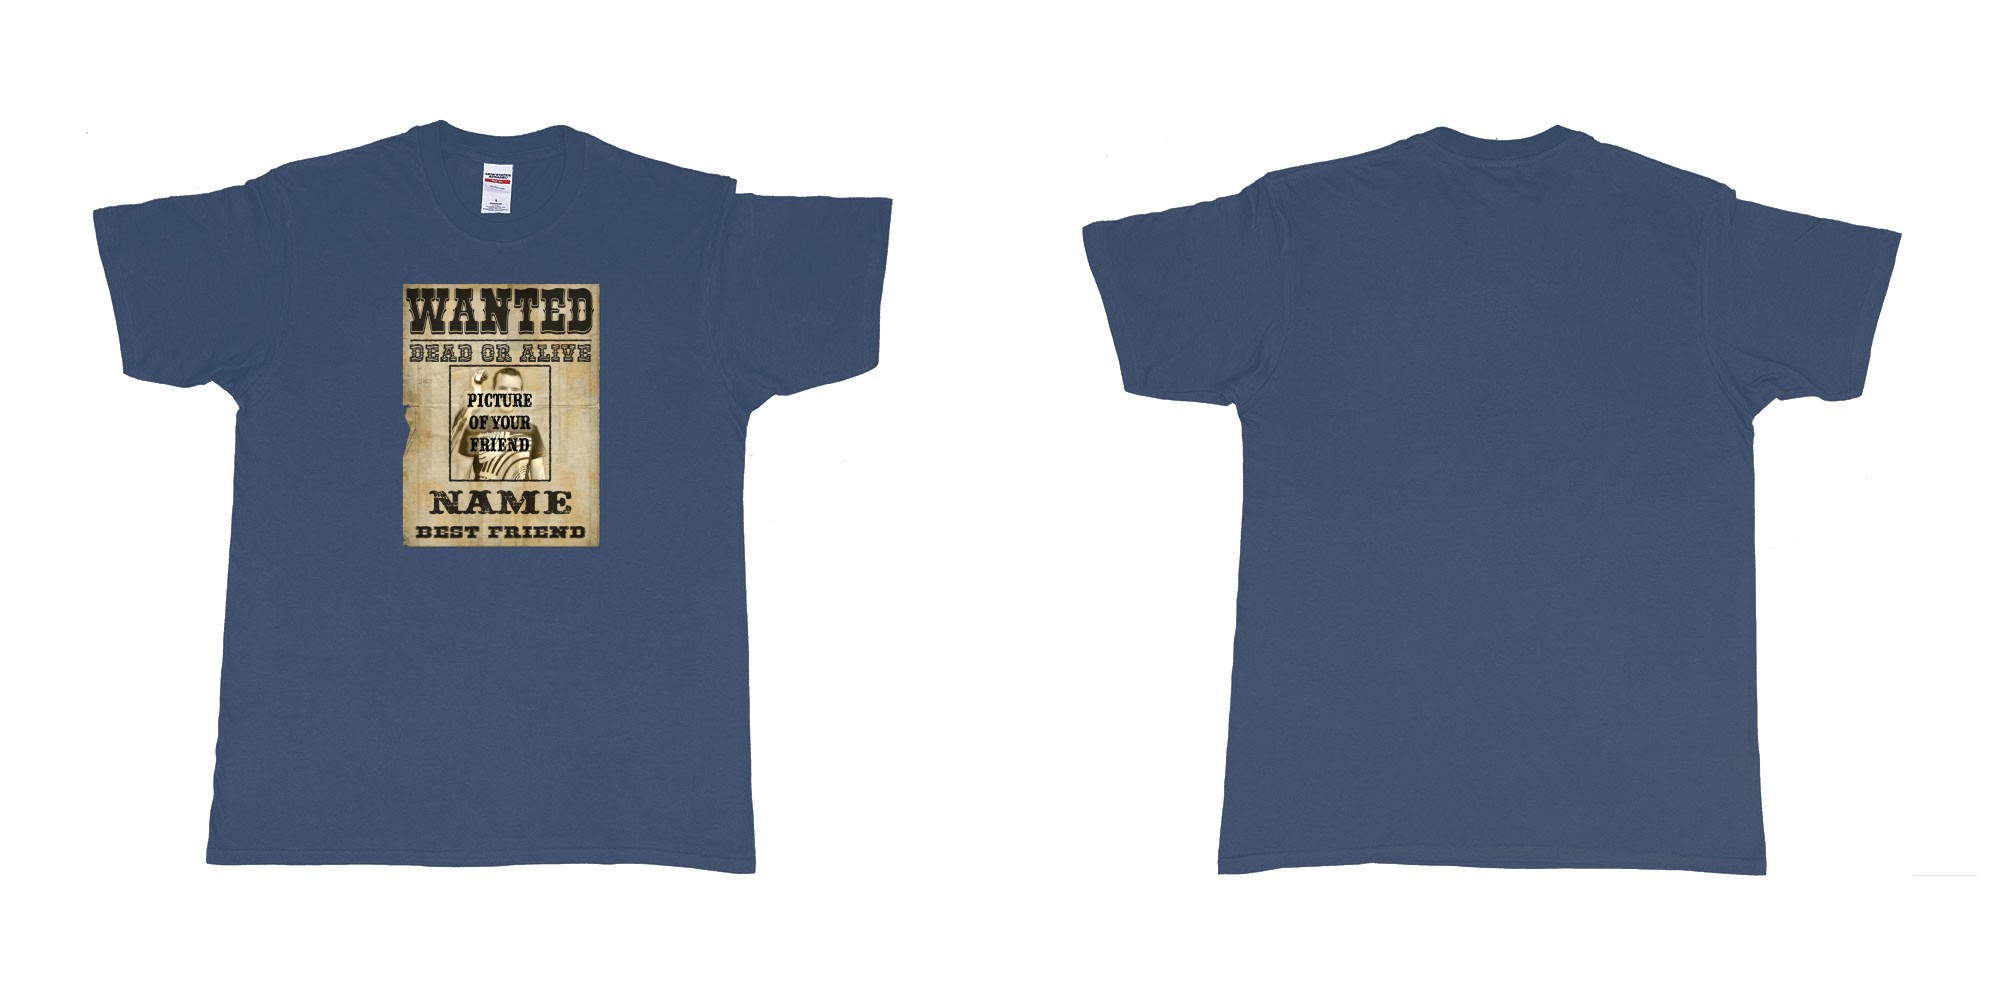 Custom tshirt design Wanted Poster in fabric color navy choice your own text made in Bali by The Pirate Way